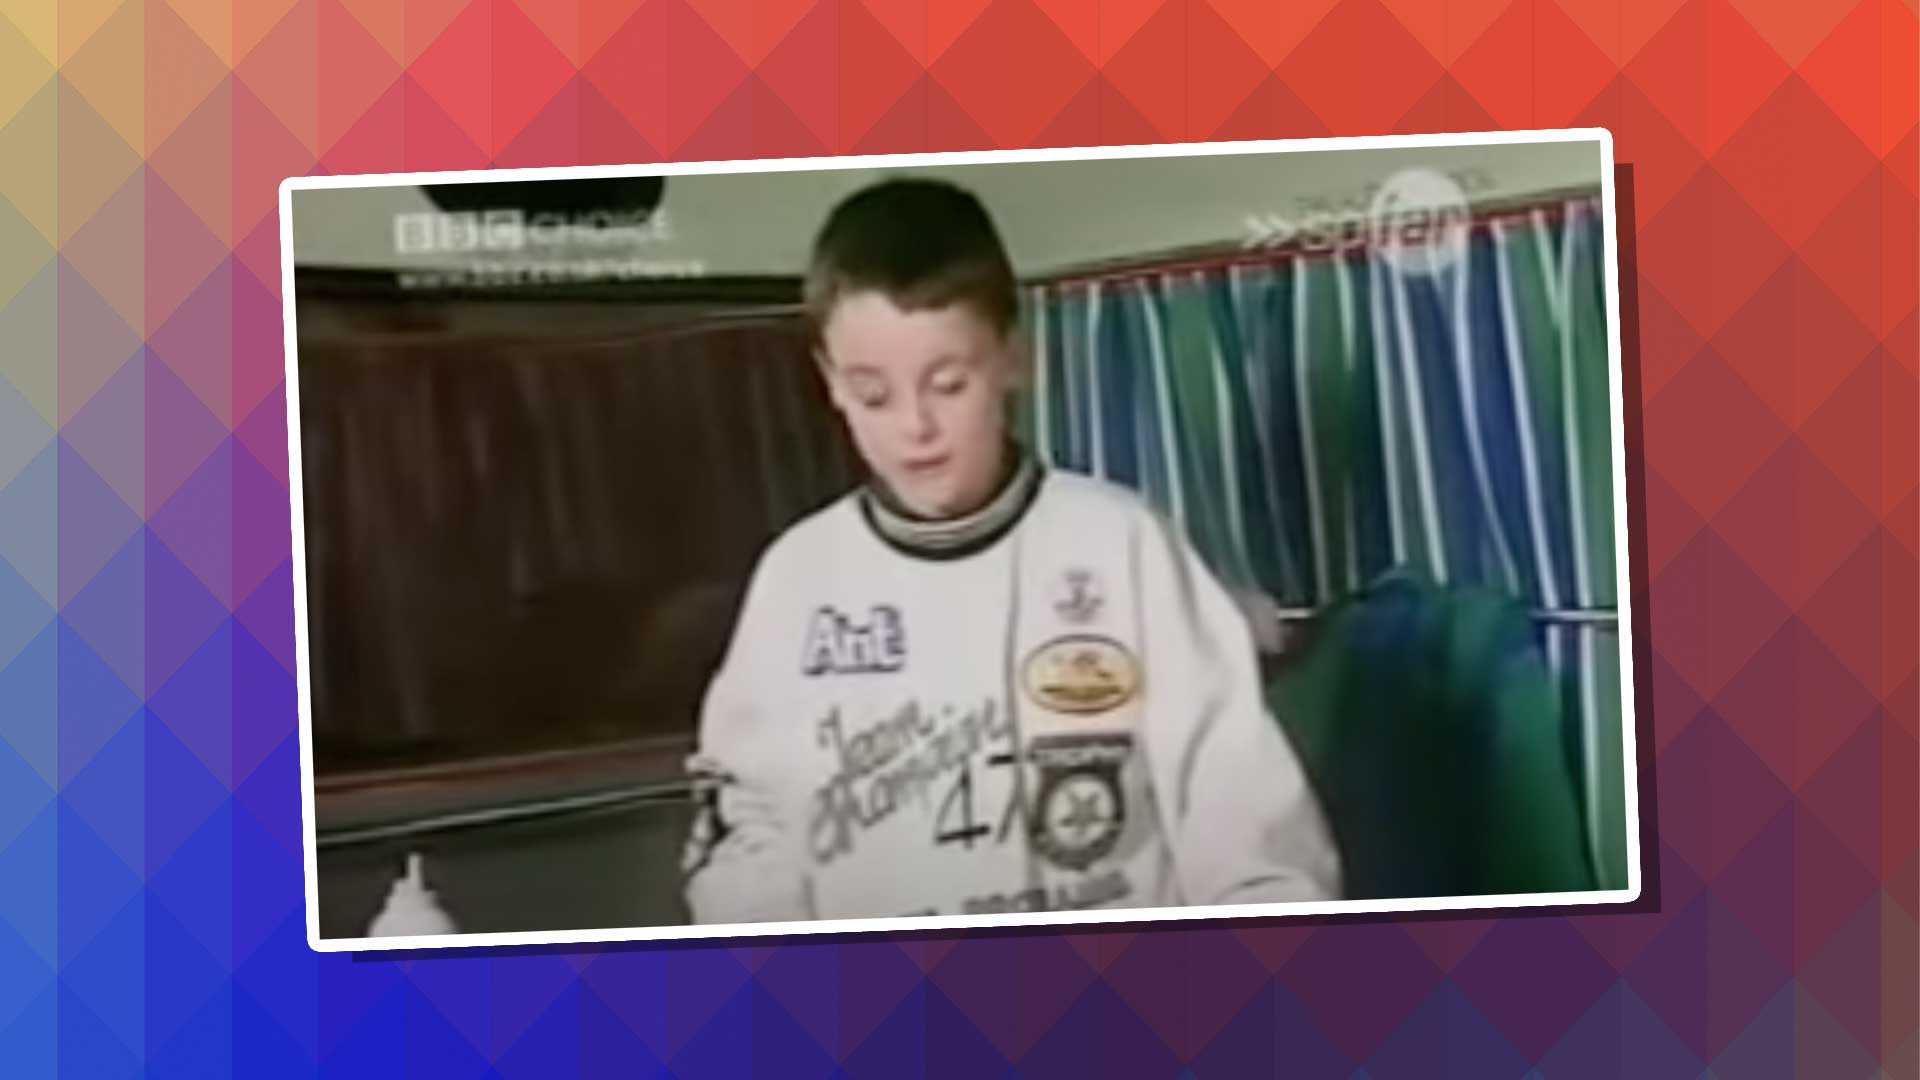 A young lad on BBC TV